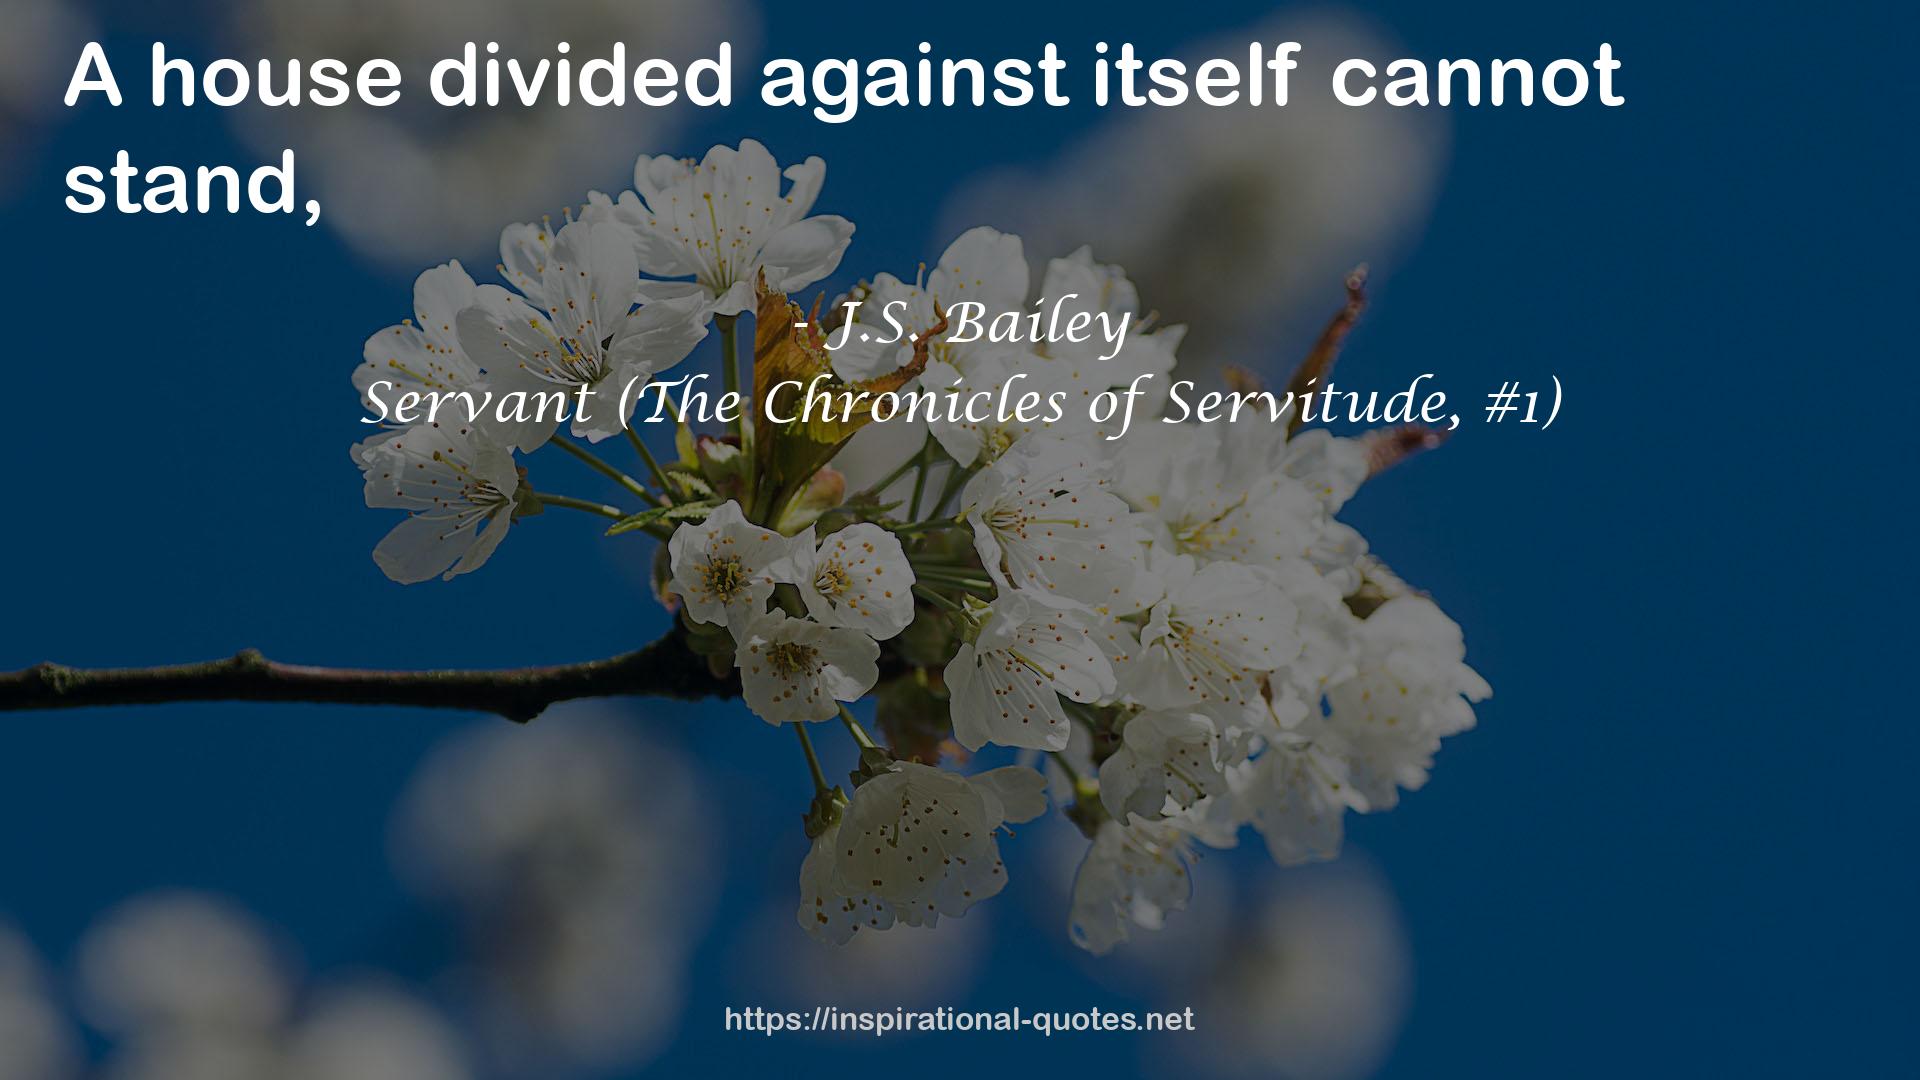 Servant (The Chronicles of Servitude, #1) QUOTES